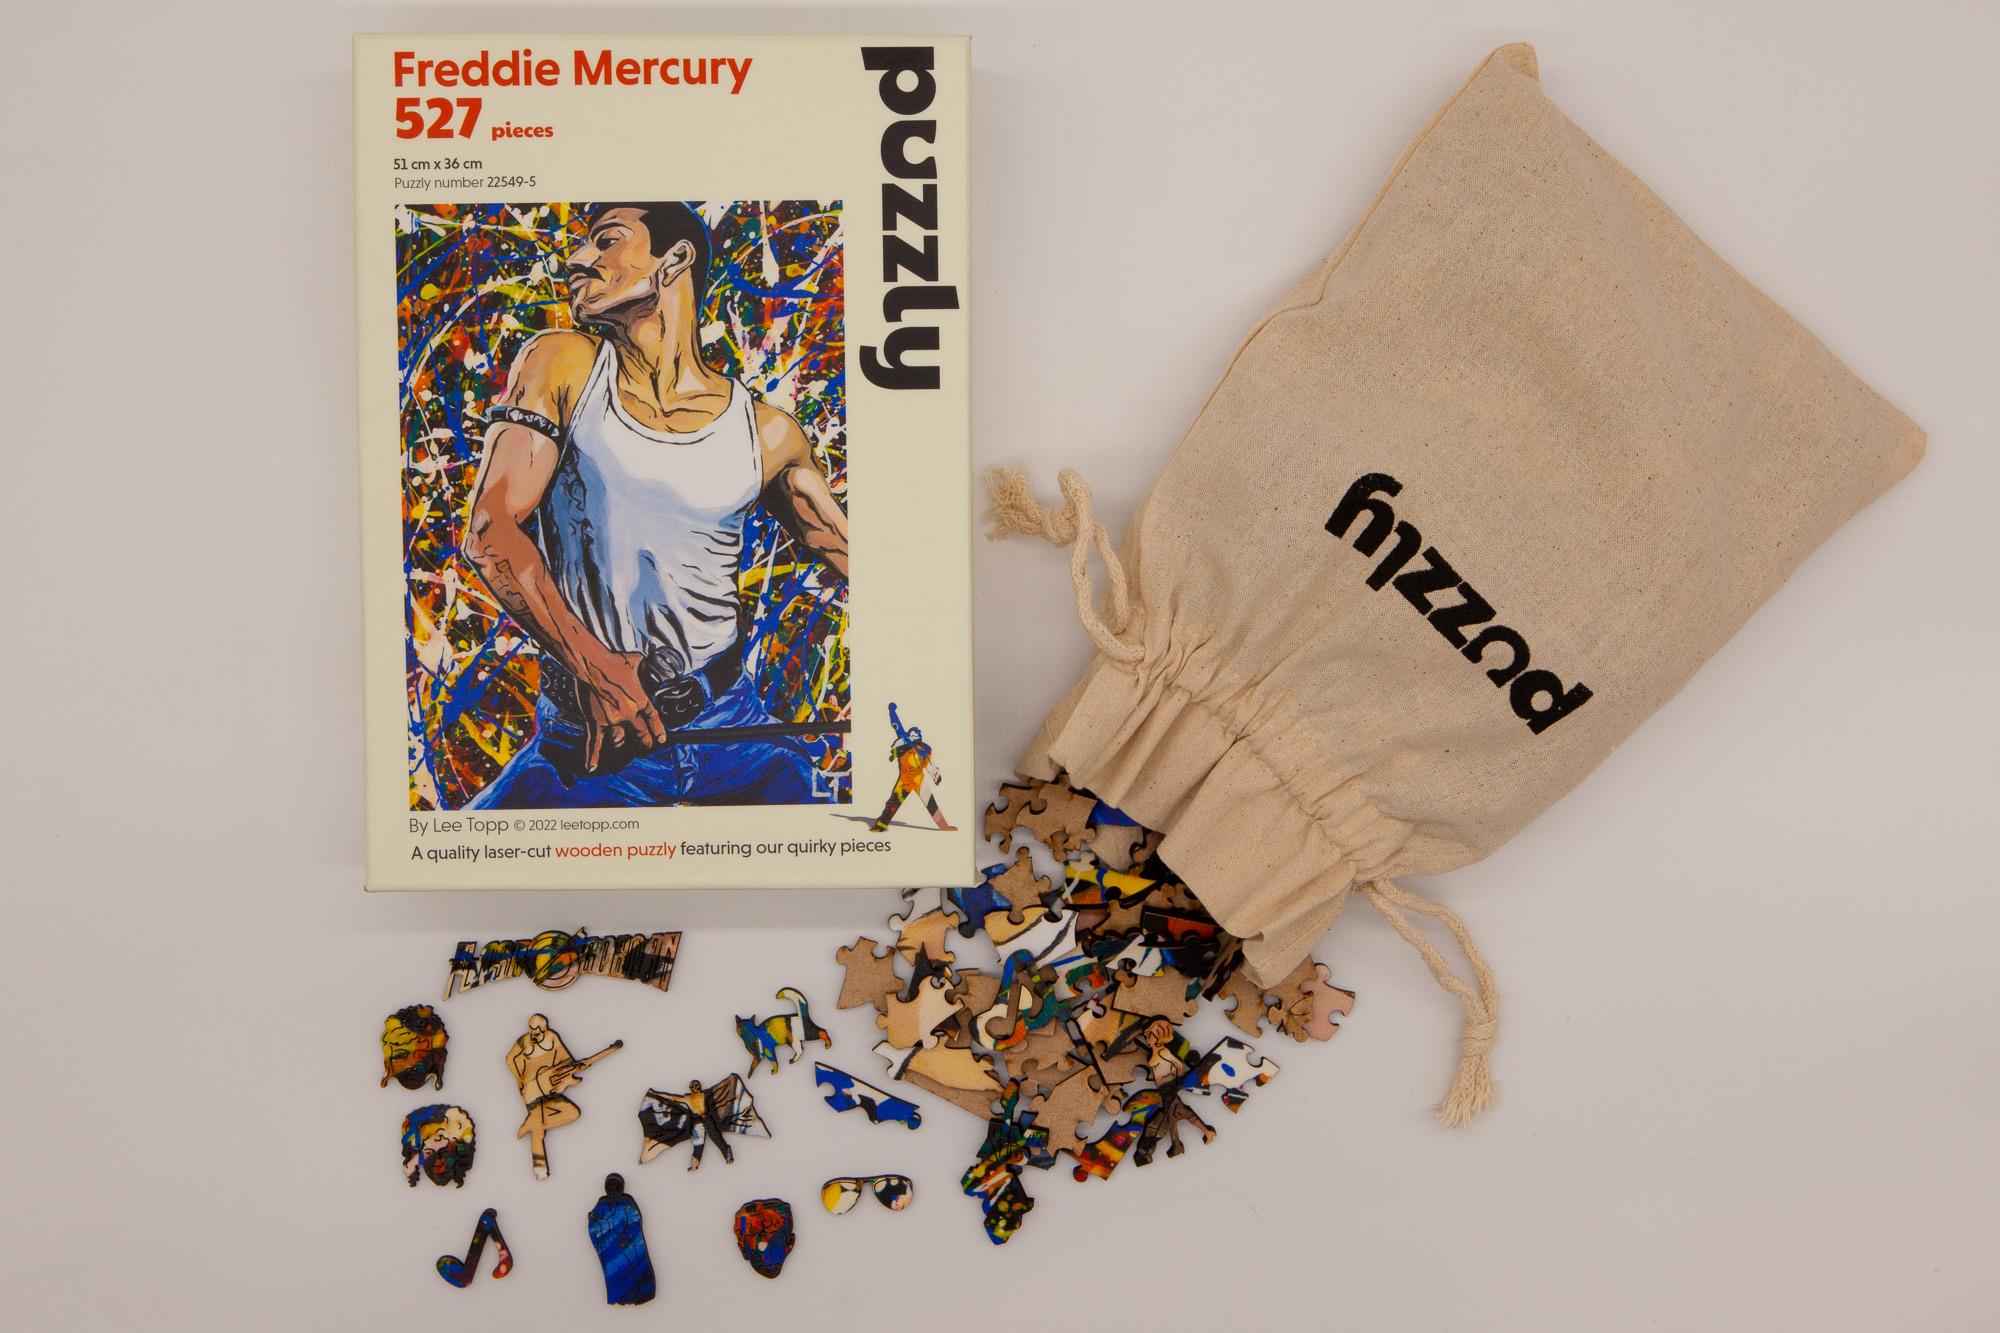 Freddie Mercury Wooden Puzzle by Puzzly